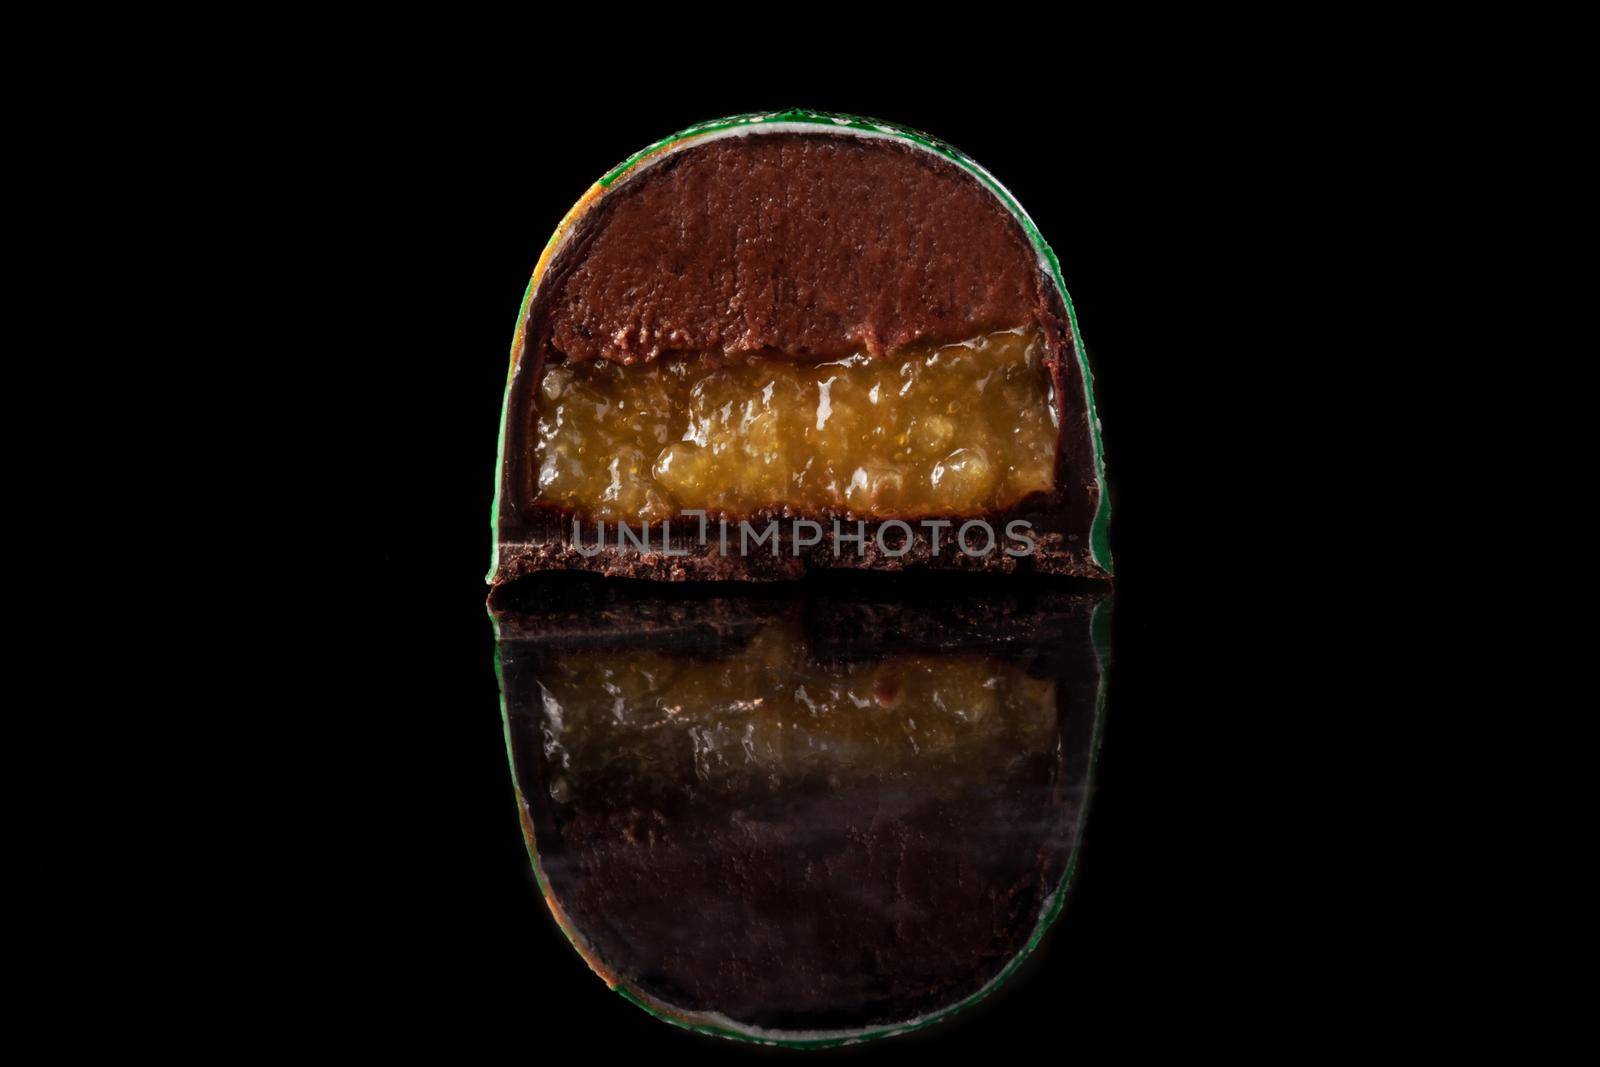 Cut luxury handmade candy with chocolate and yellow confiture filling on black background. Exclusive handcrafted bonbon